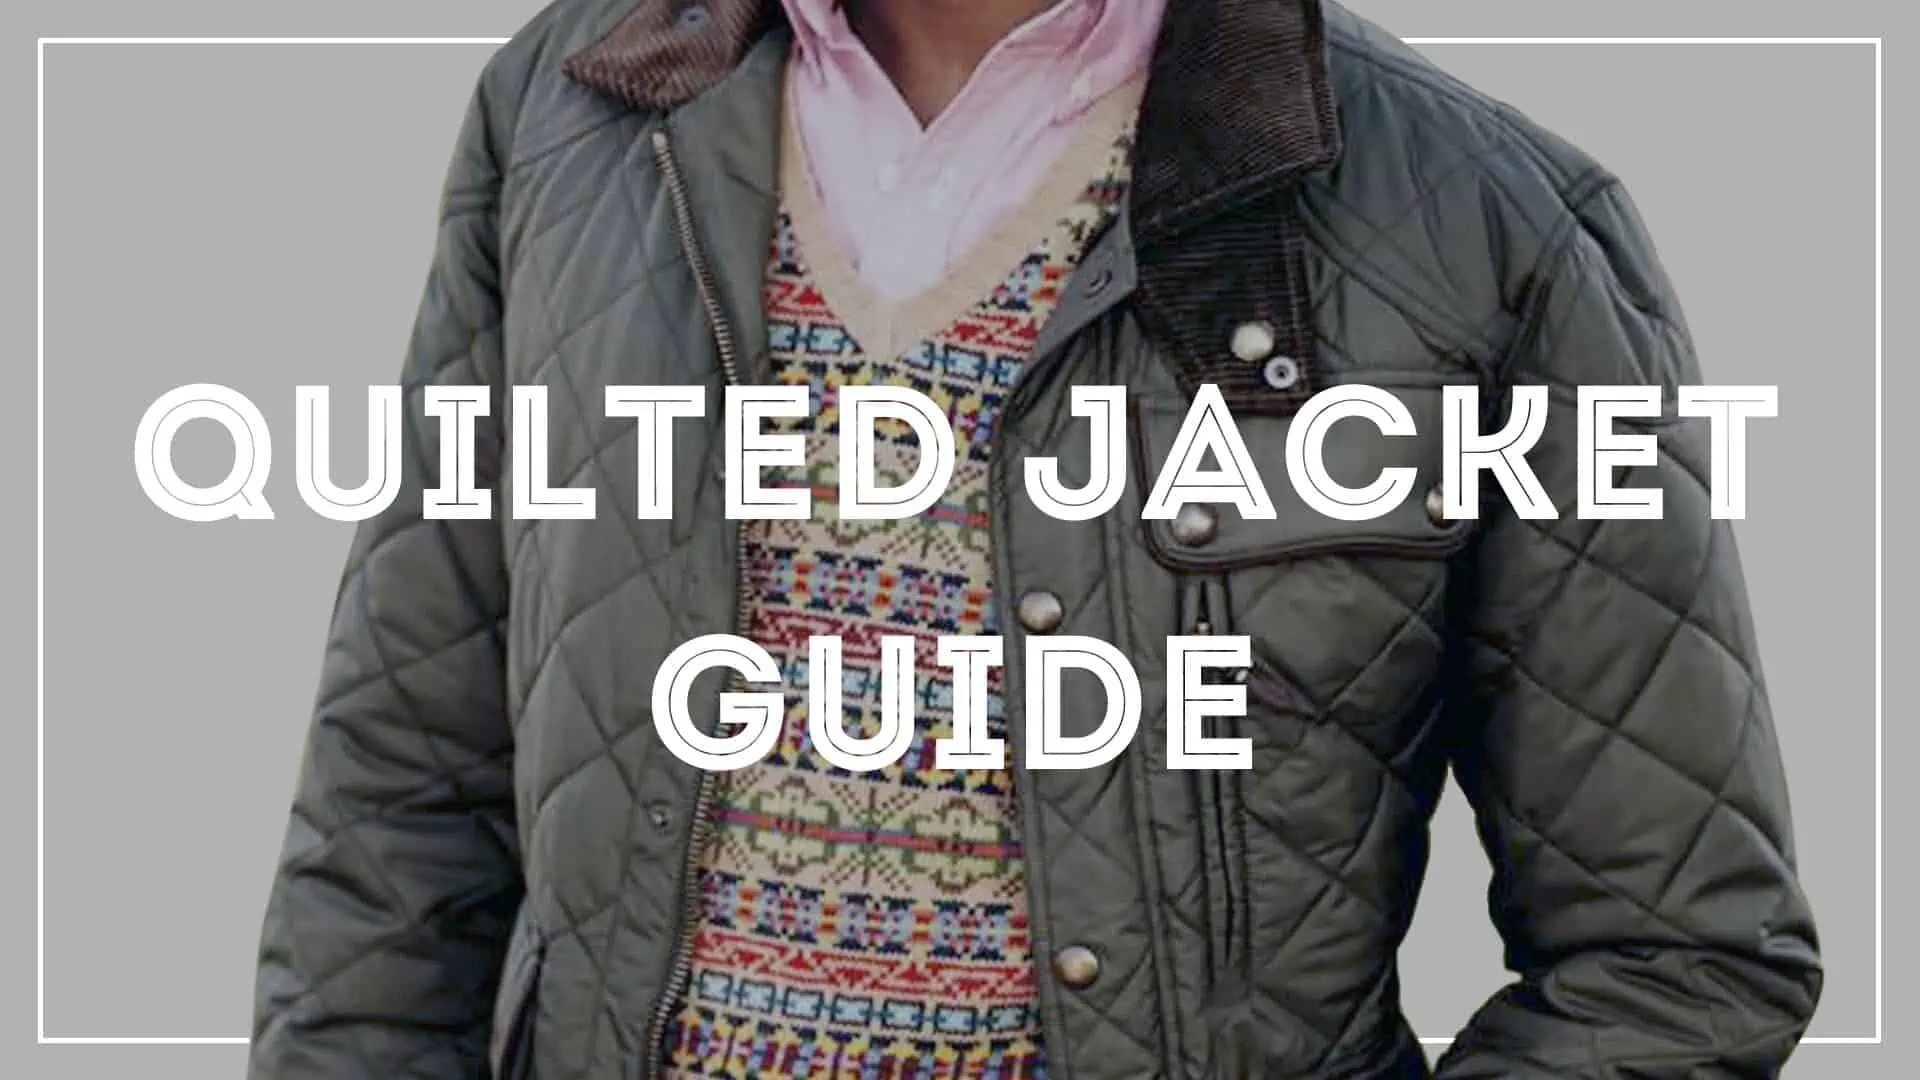 Quilted Jacket Guide 1920x1080 1